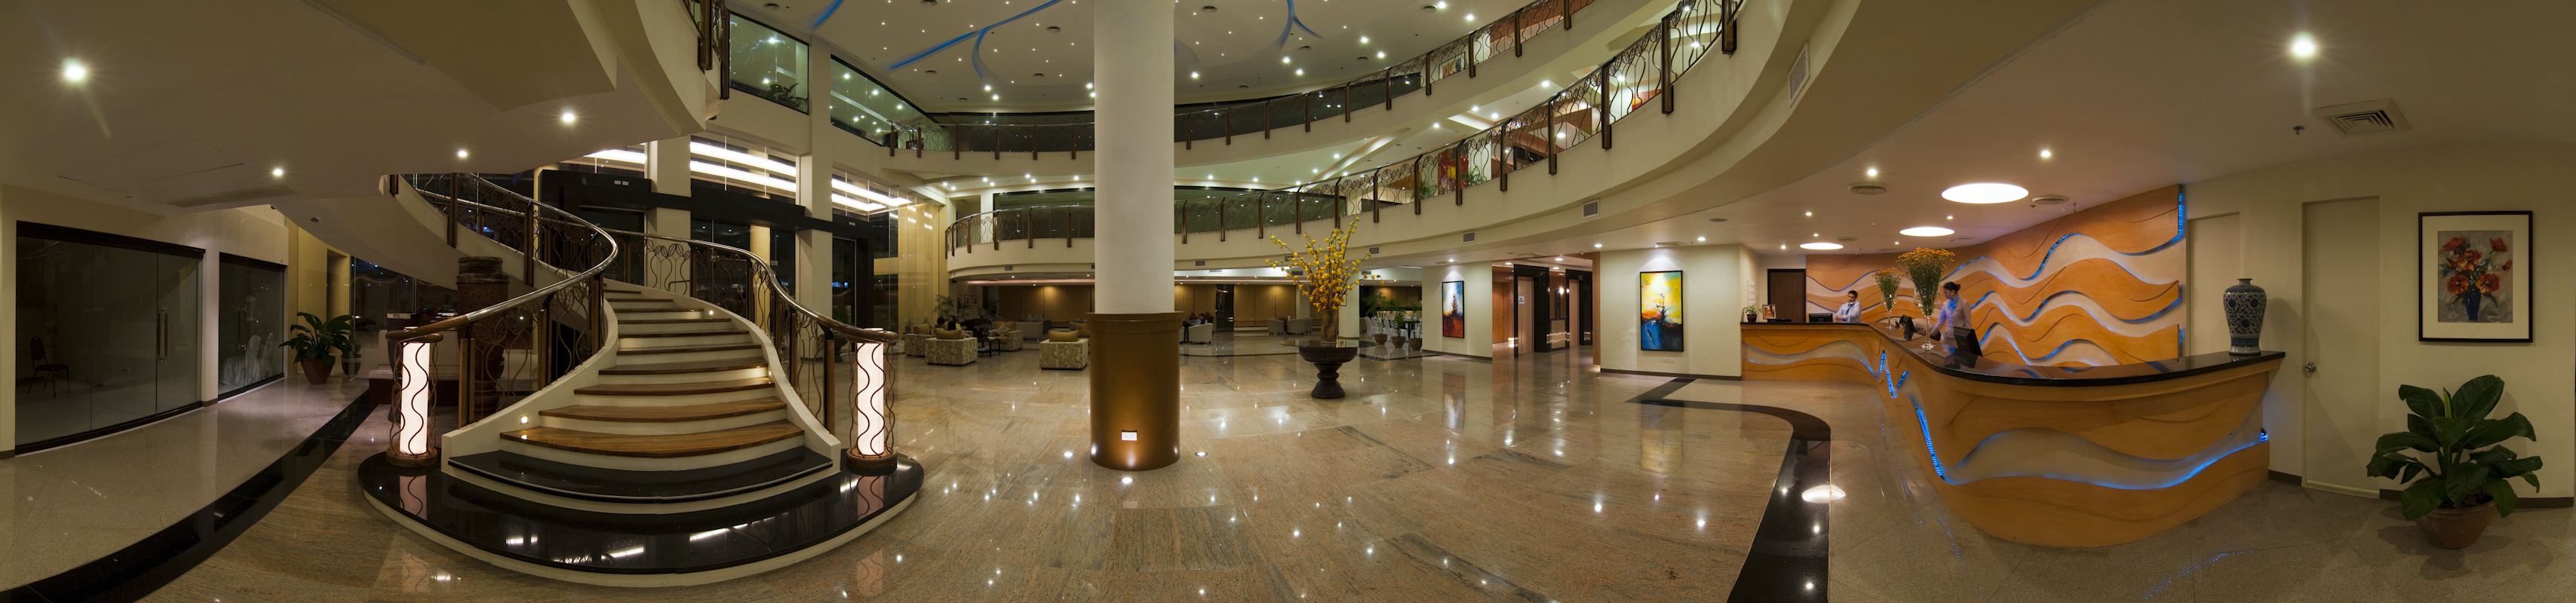 The Pinnacle Hotel and Suites - Lobby 1